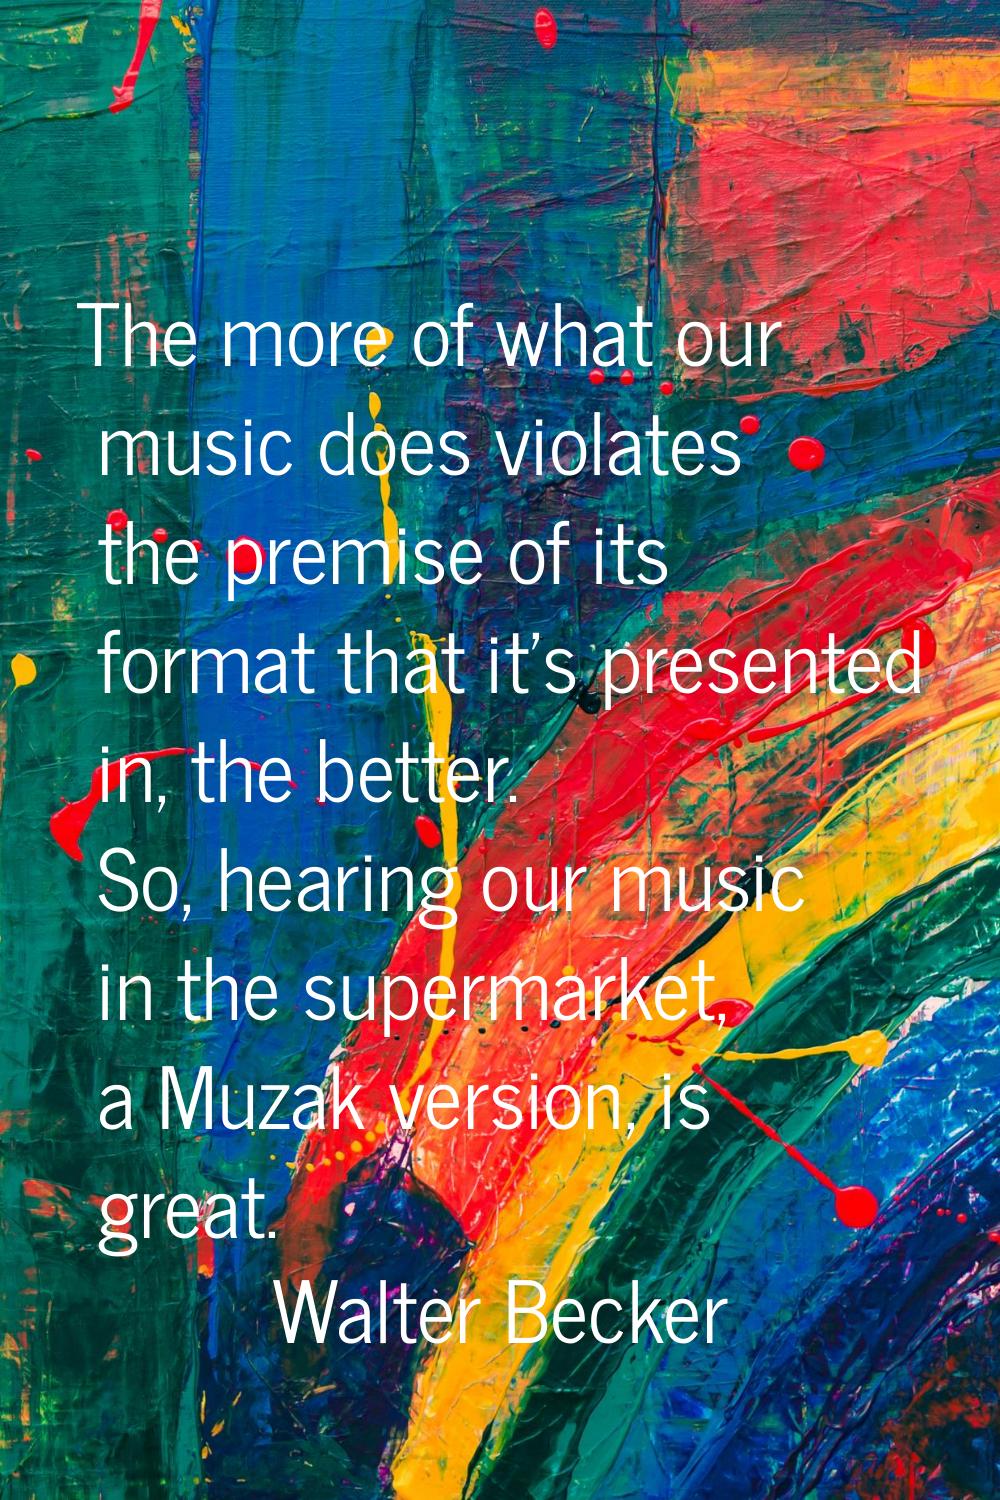 The more of what our music does violates the premise of its format that it's presented in, the bett